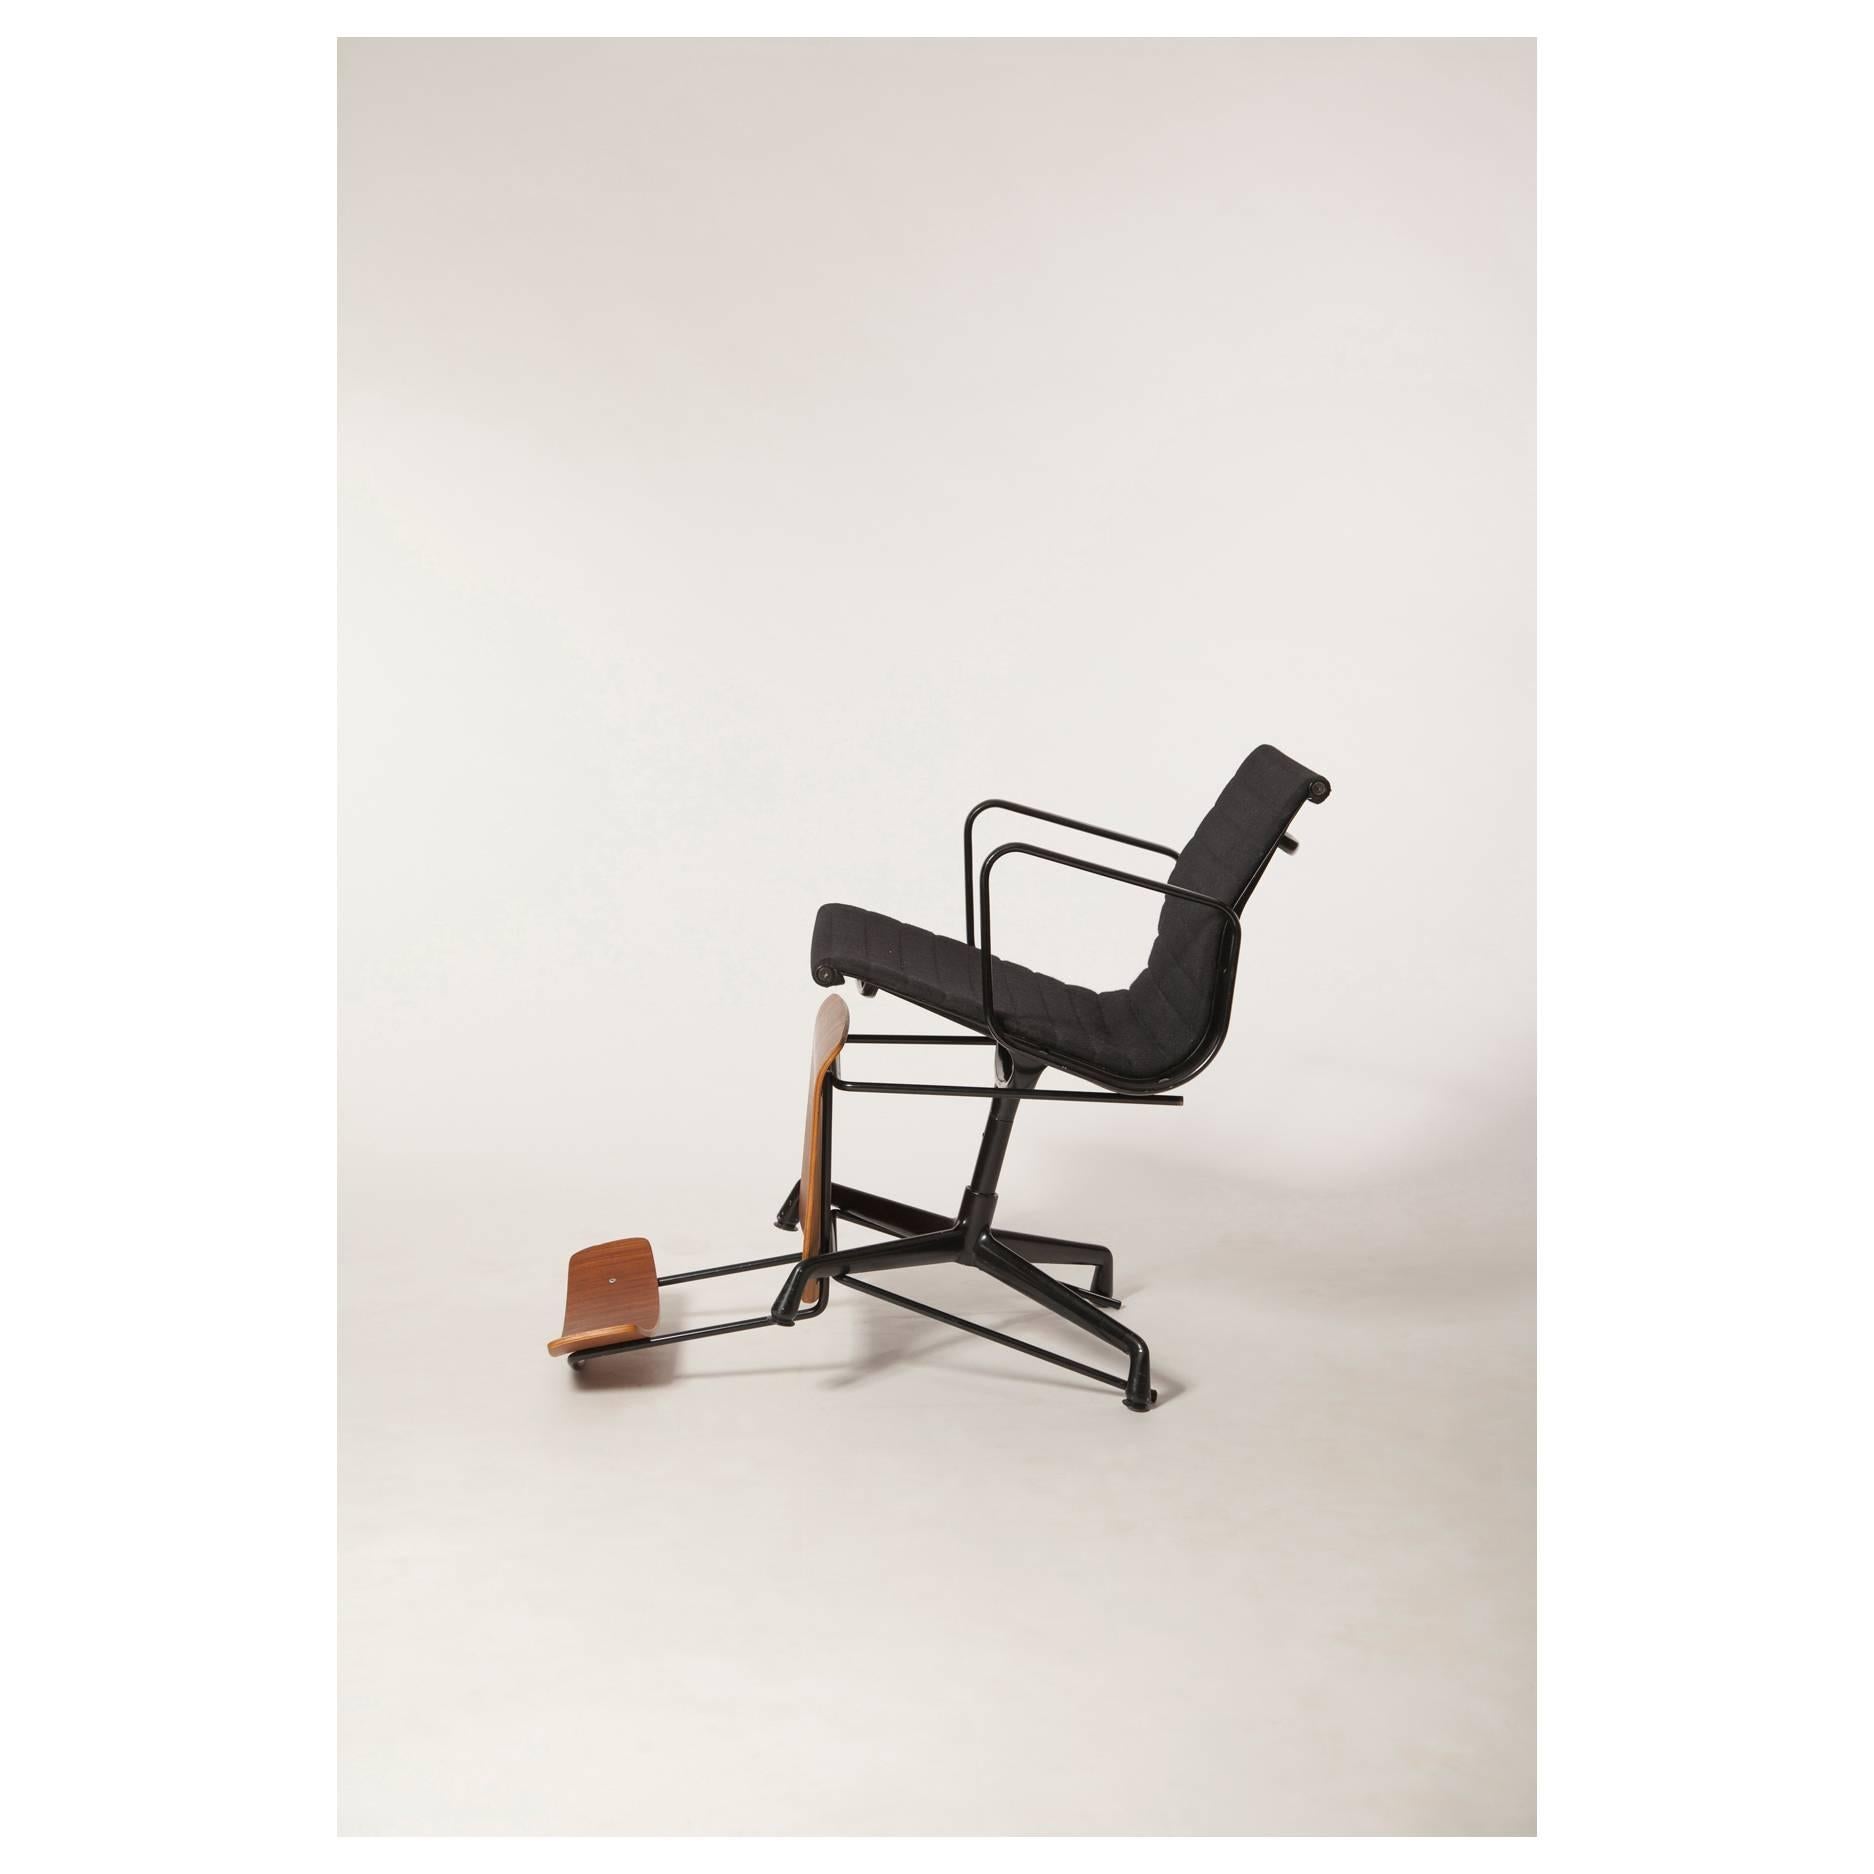 The Chair Affair 05, print by Lucas Maassen and Magriet Craens, 2015 For Sale